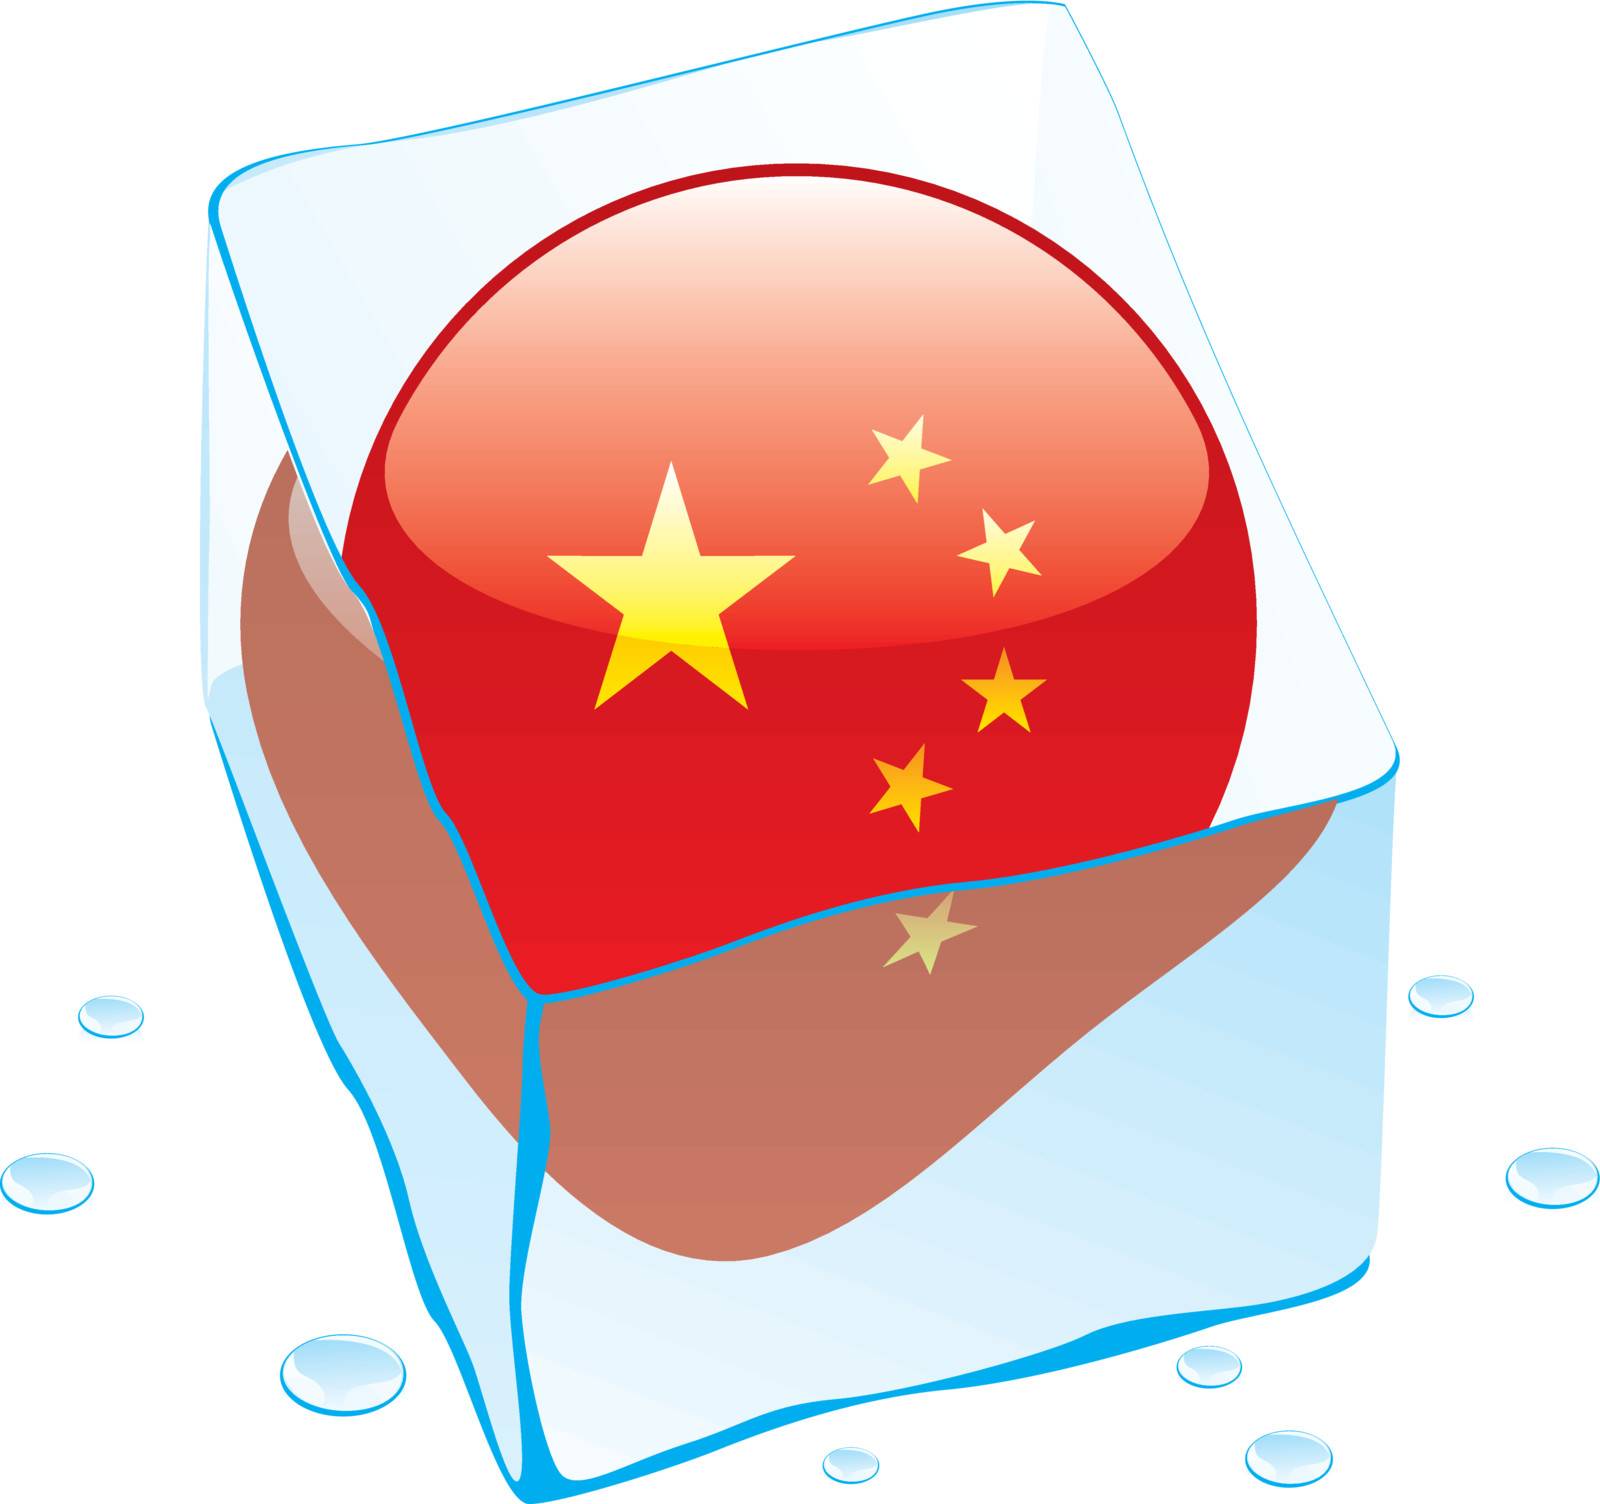 fully editable vector illustration of china button flag frozen in ice cube